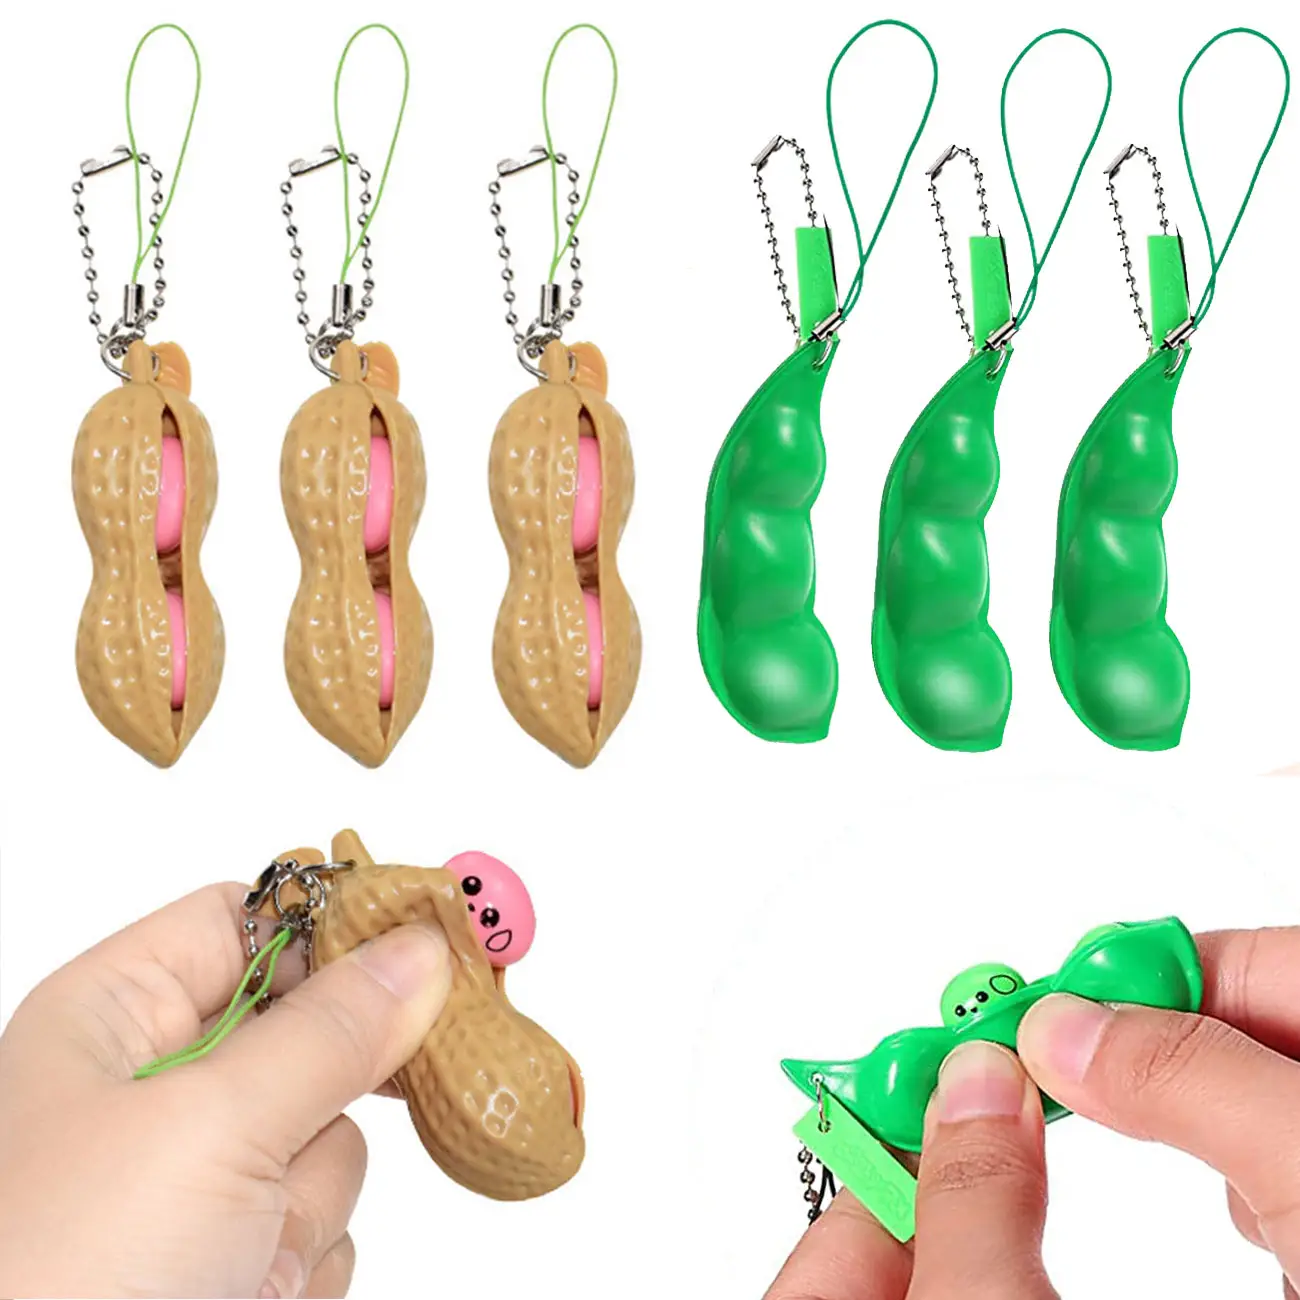 Squeez Beans Peas Pea nuts Keychain Fidget Toys Squishy Anti Stress Reliever Relief Squeeze Edamame Soybean Toy